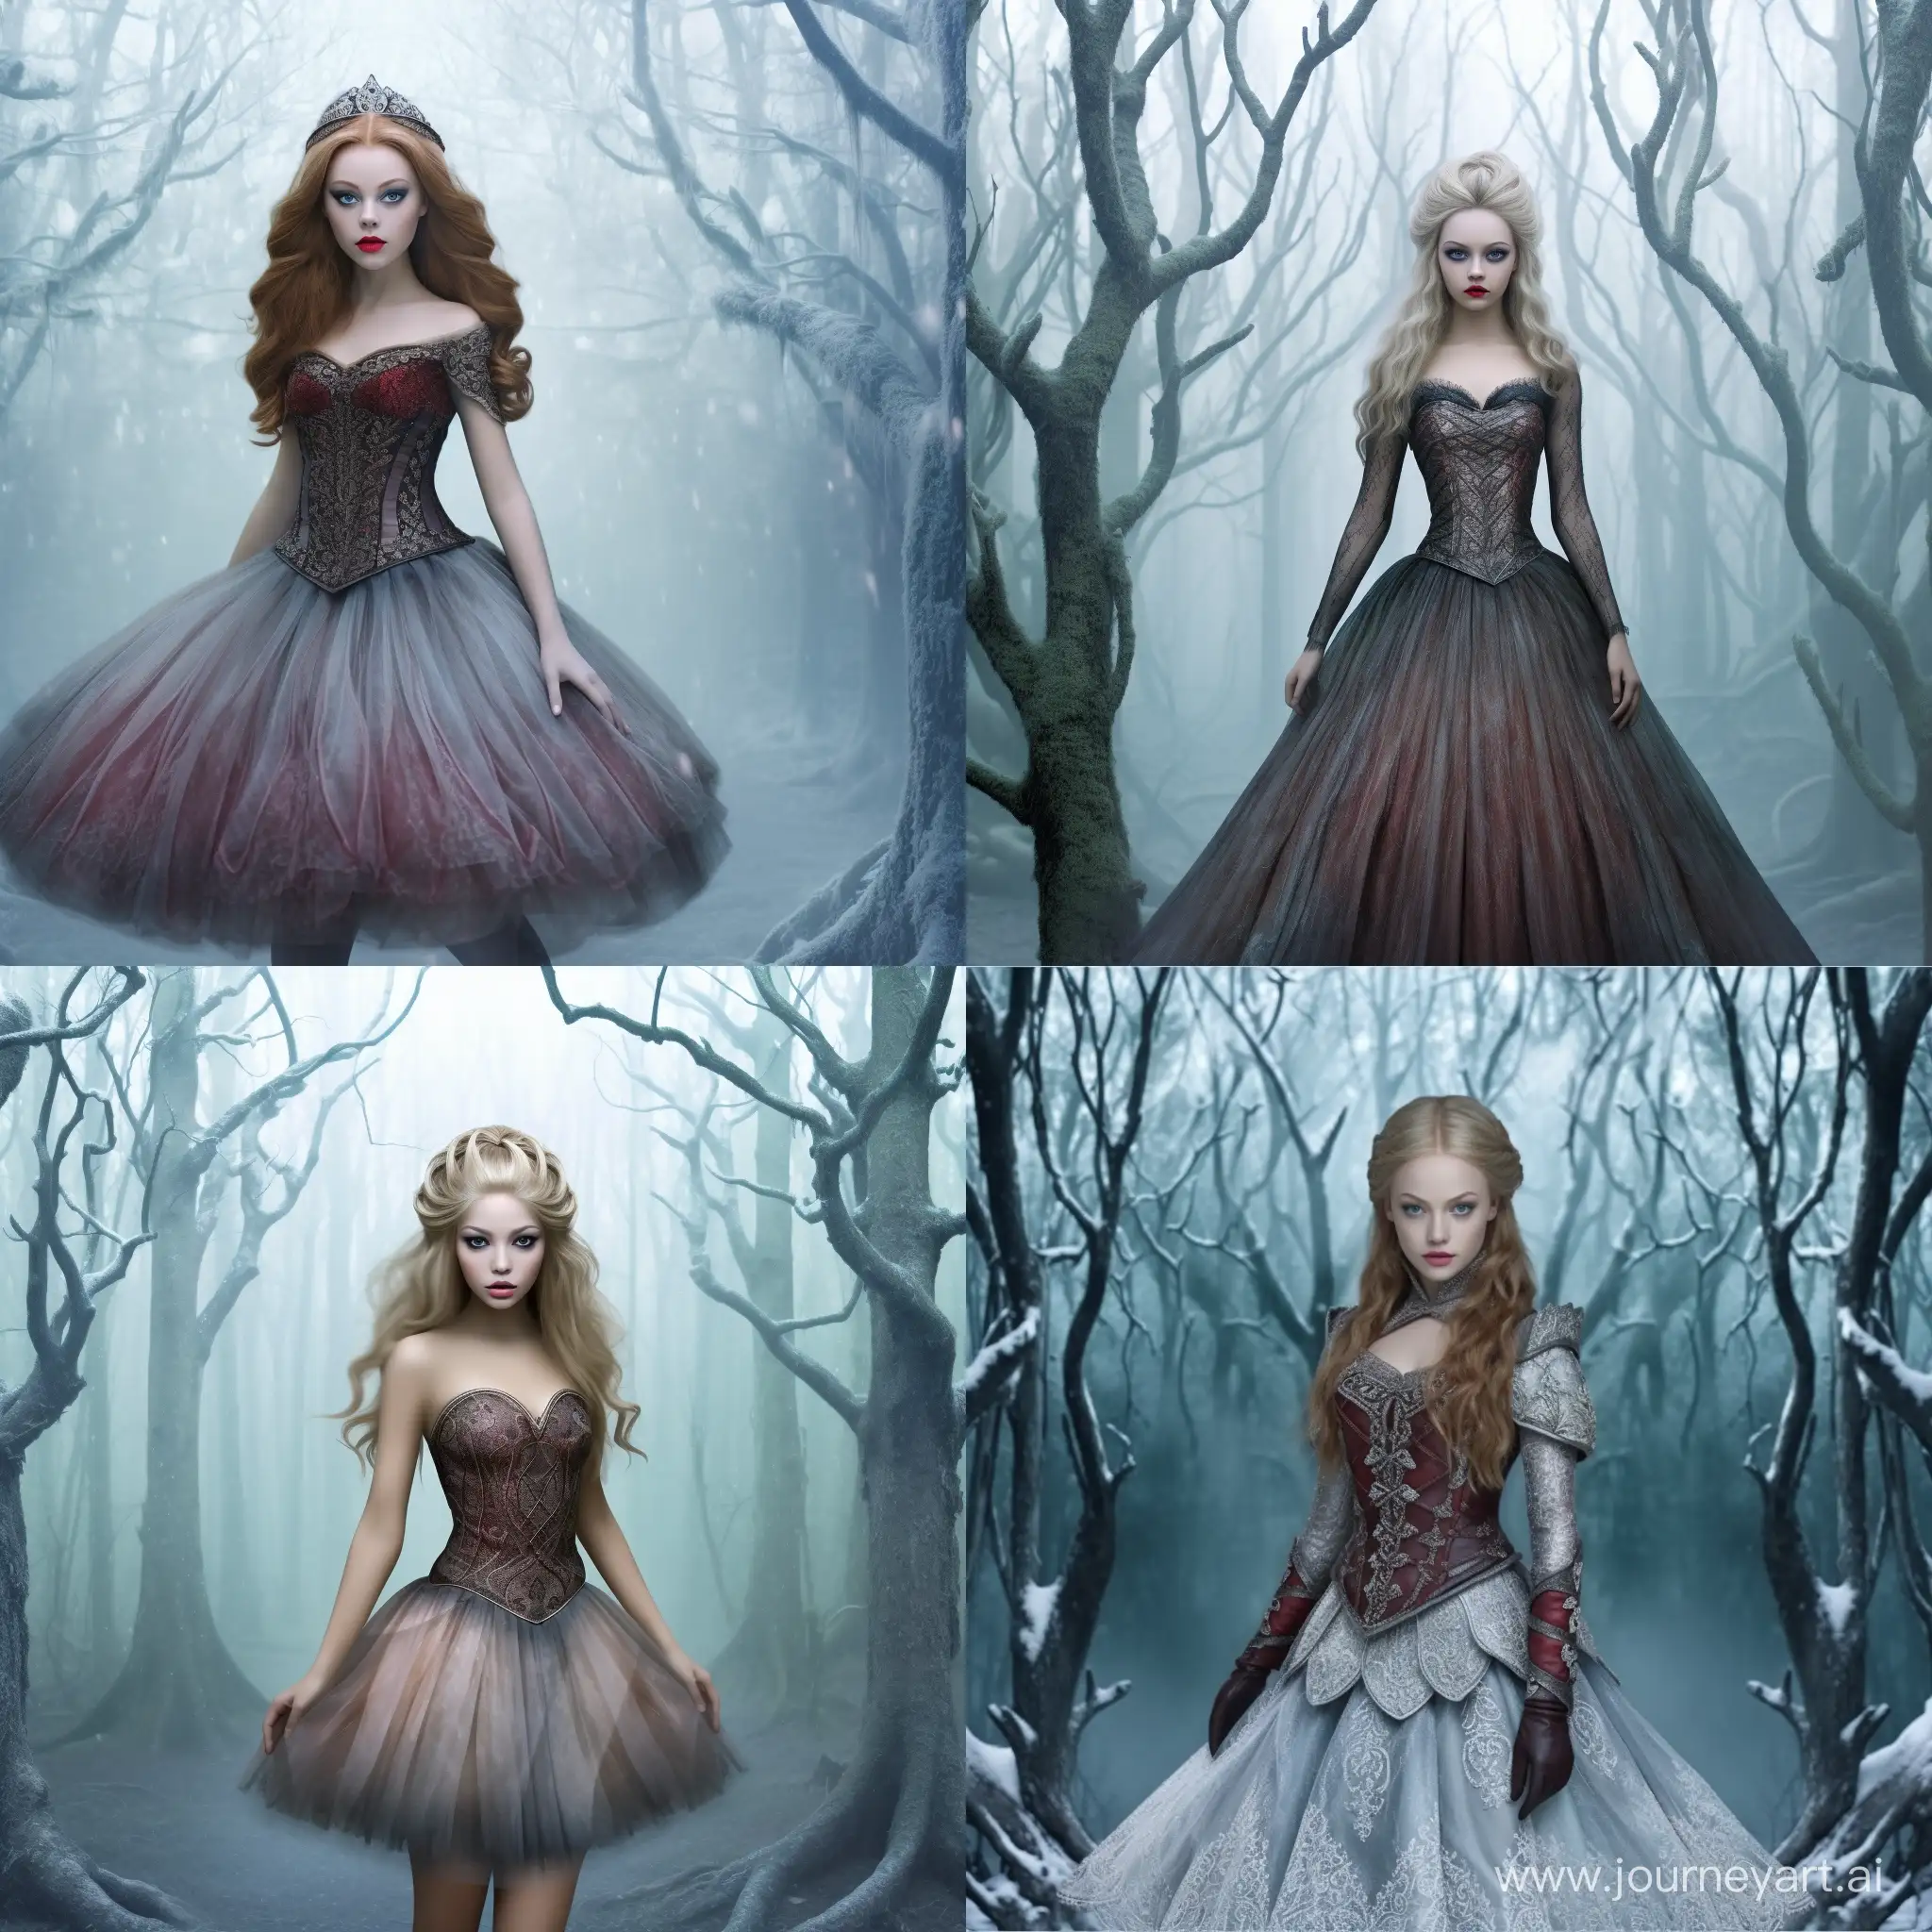 beauty nordic female model in the ice forest, magic dust on background